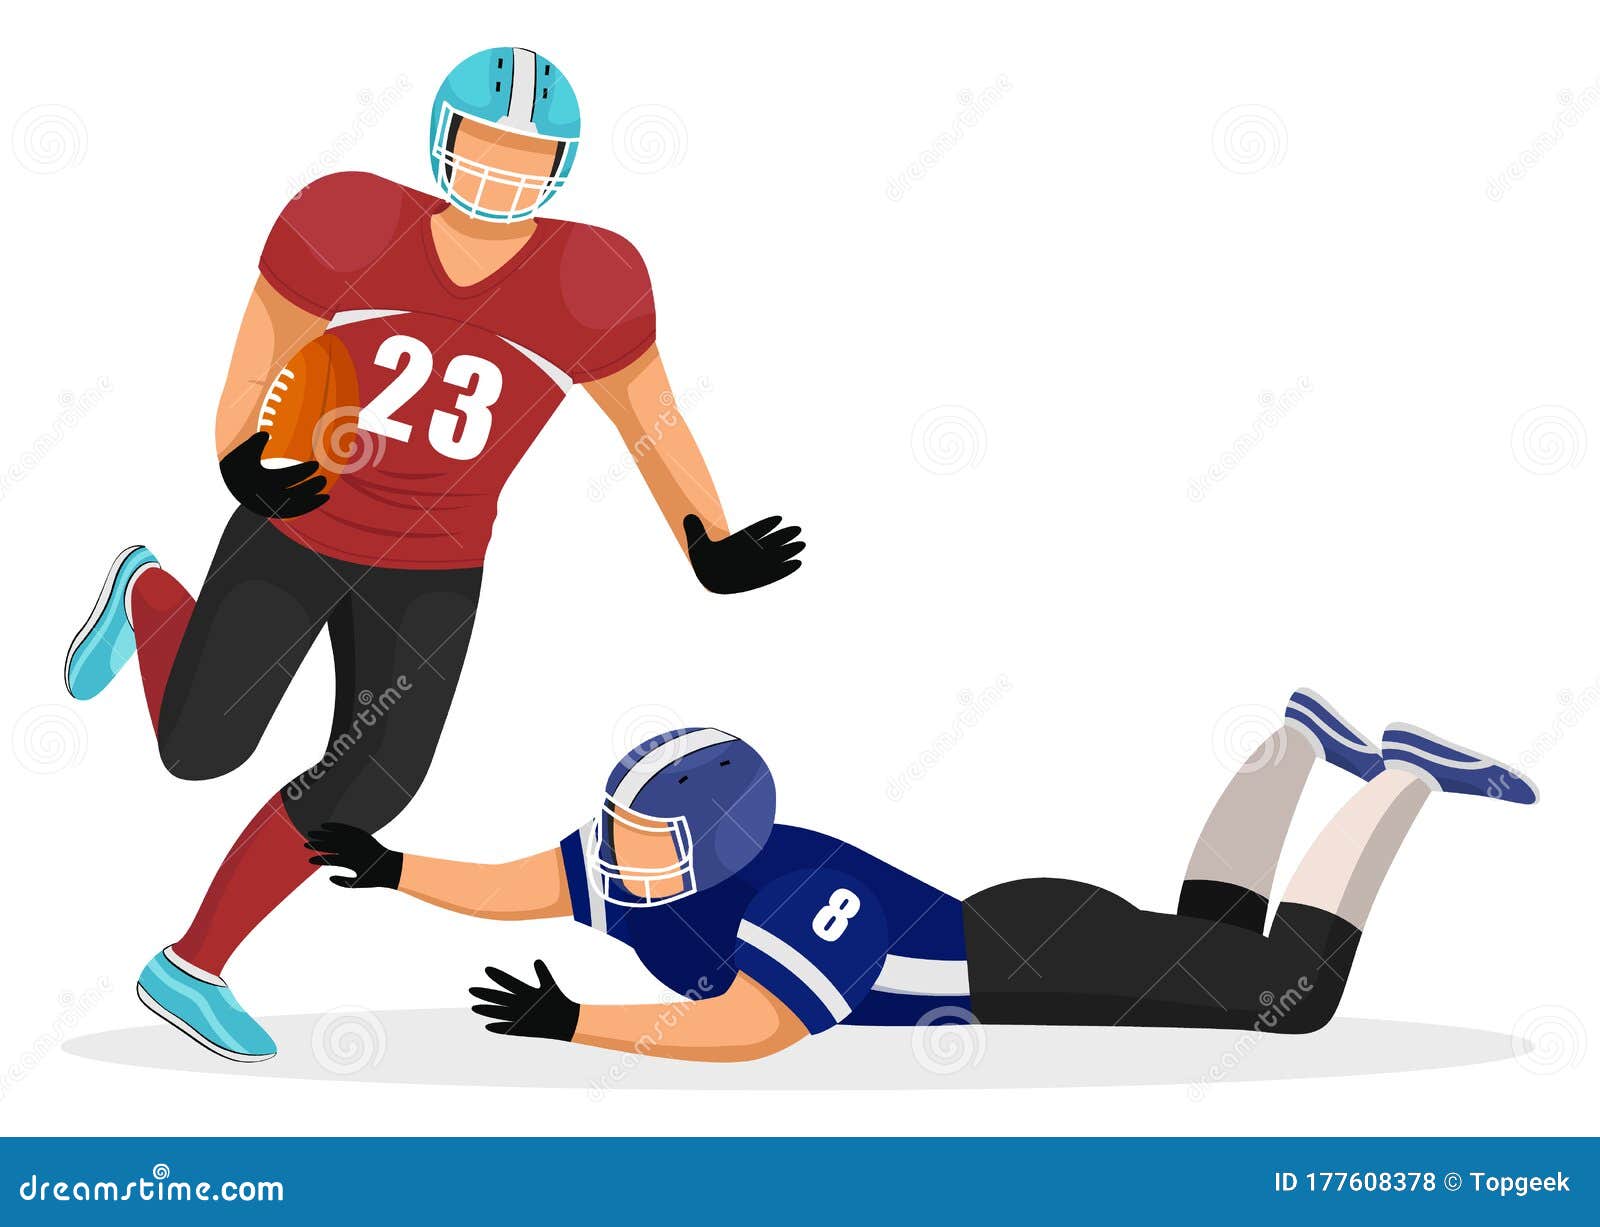 american football players, gridiron competition